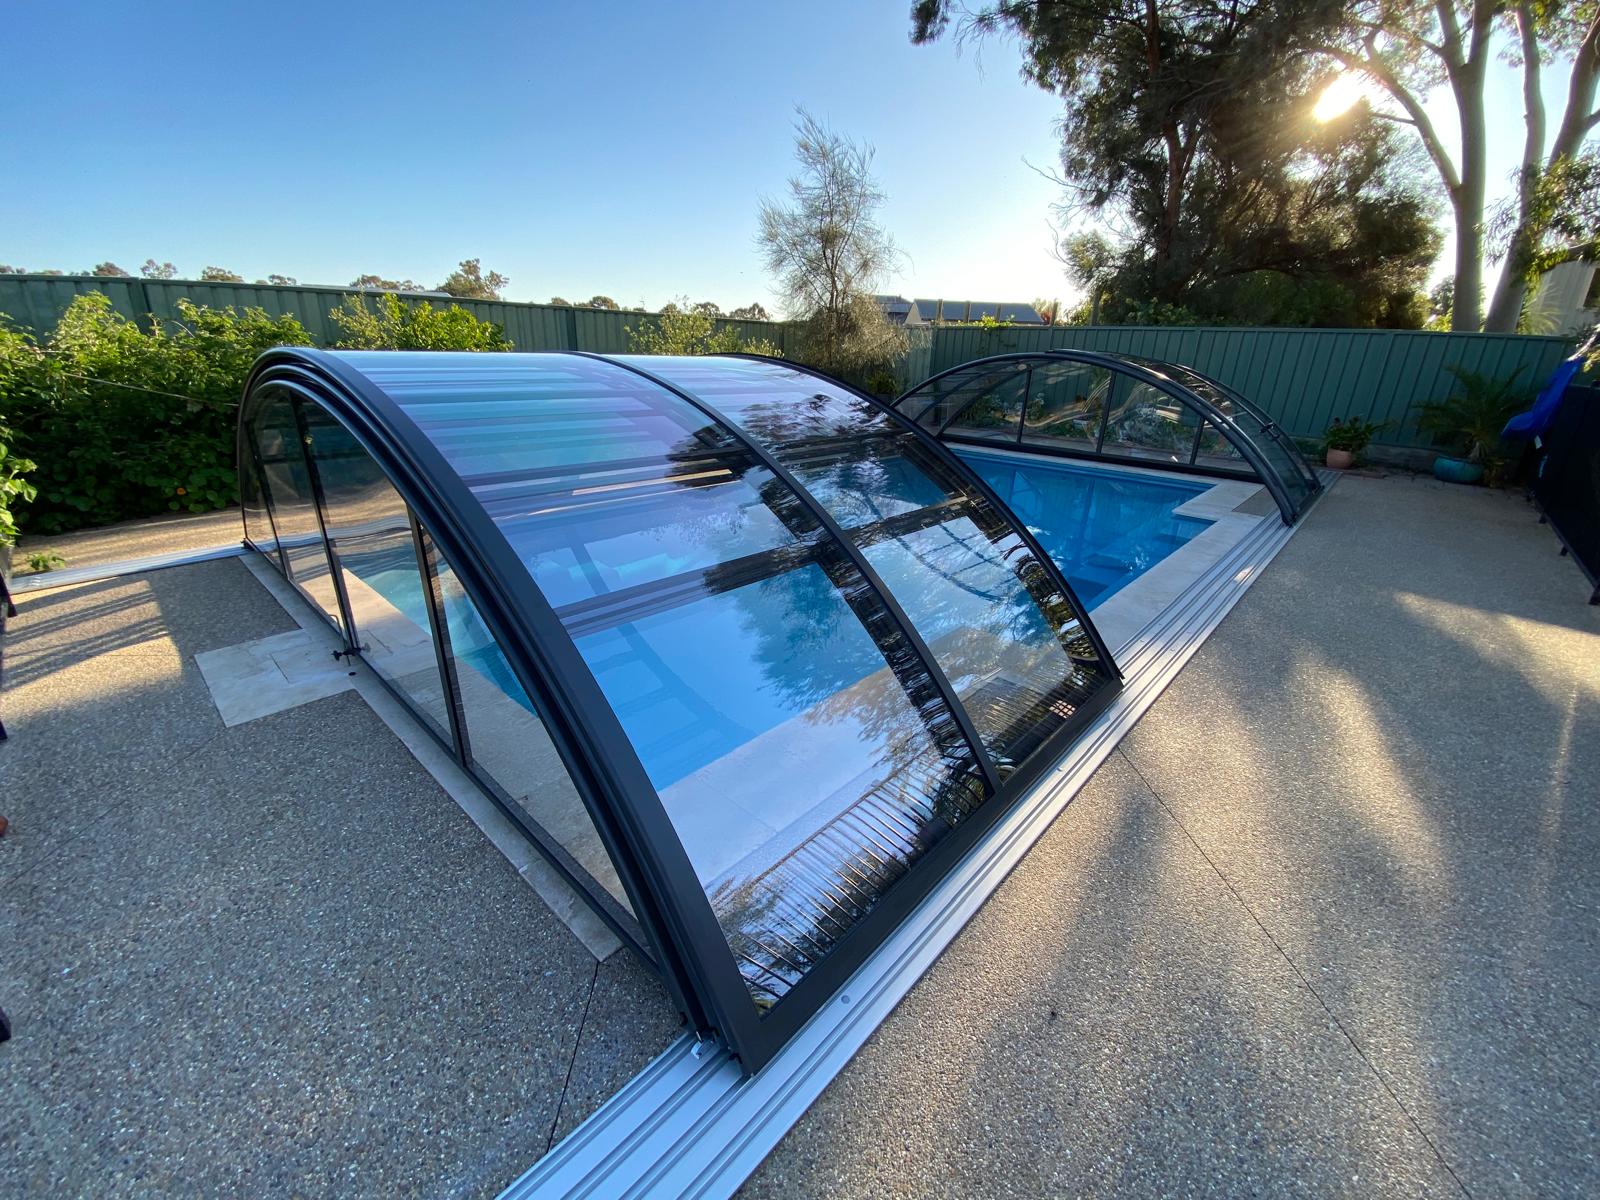 A large swimming pool with a telescopic pool enclosure opened in the middle in a melbourne garden at sunset